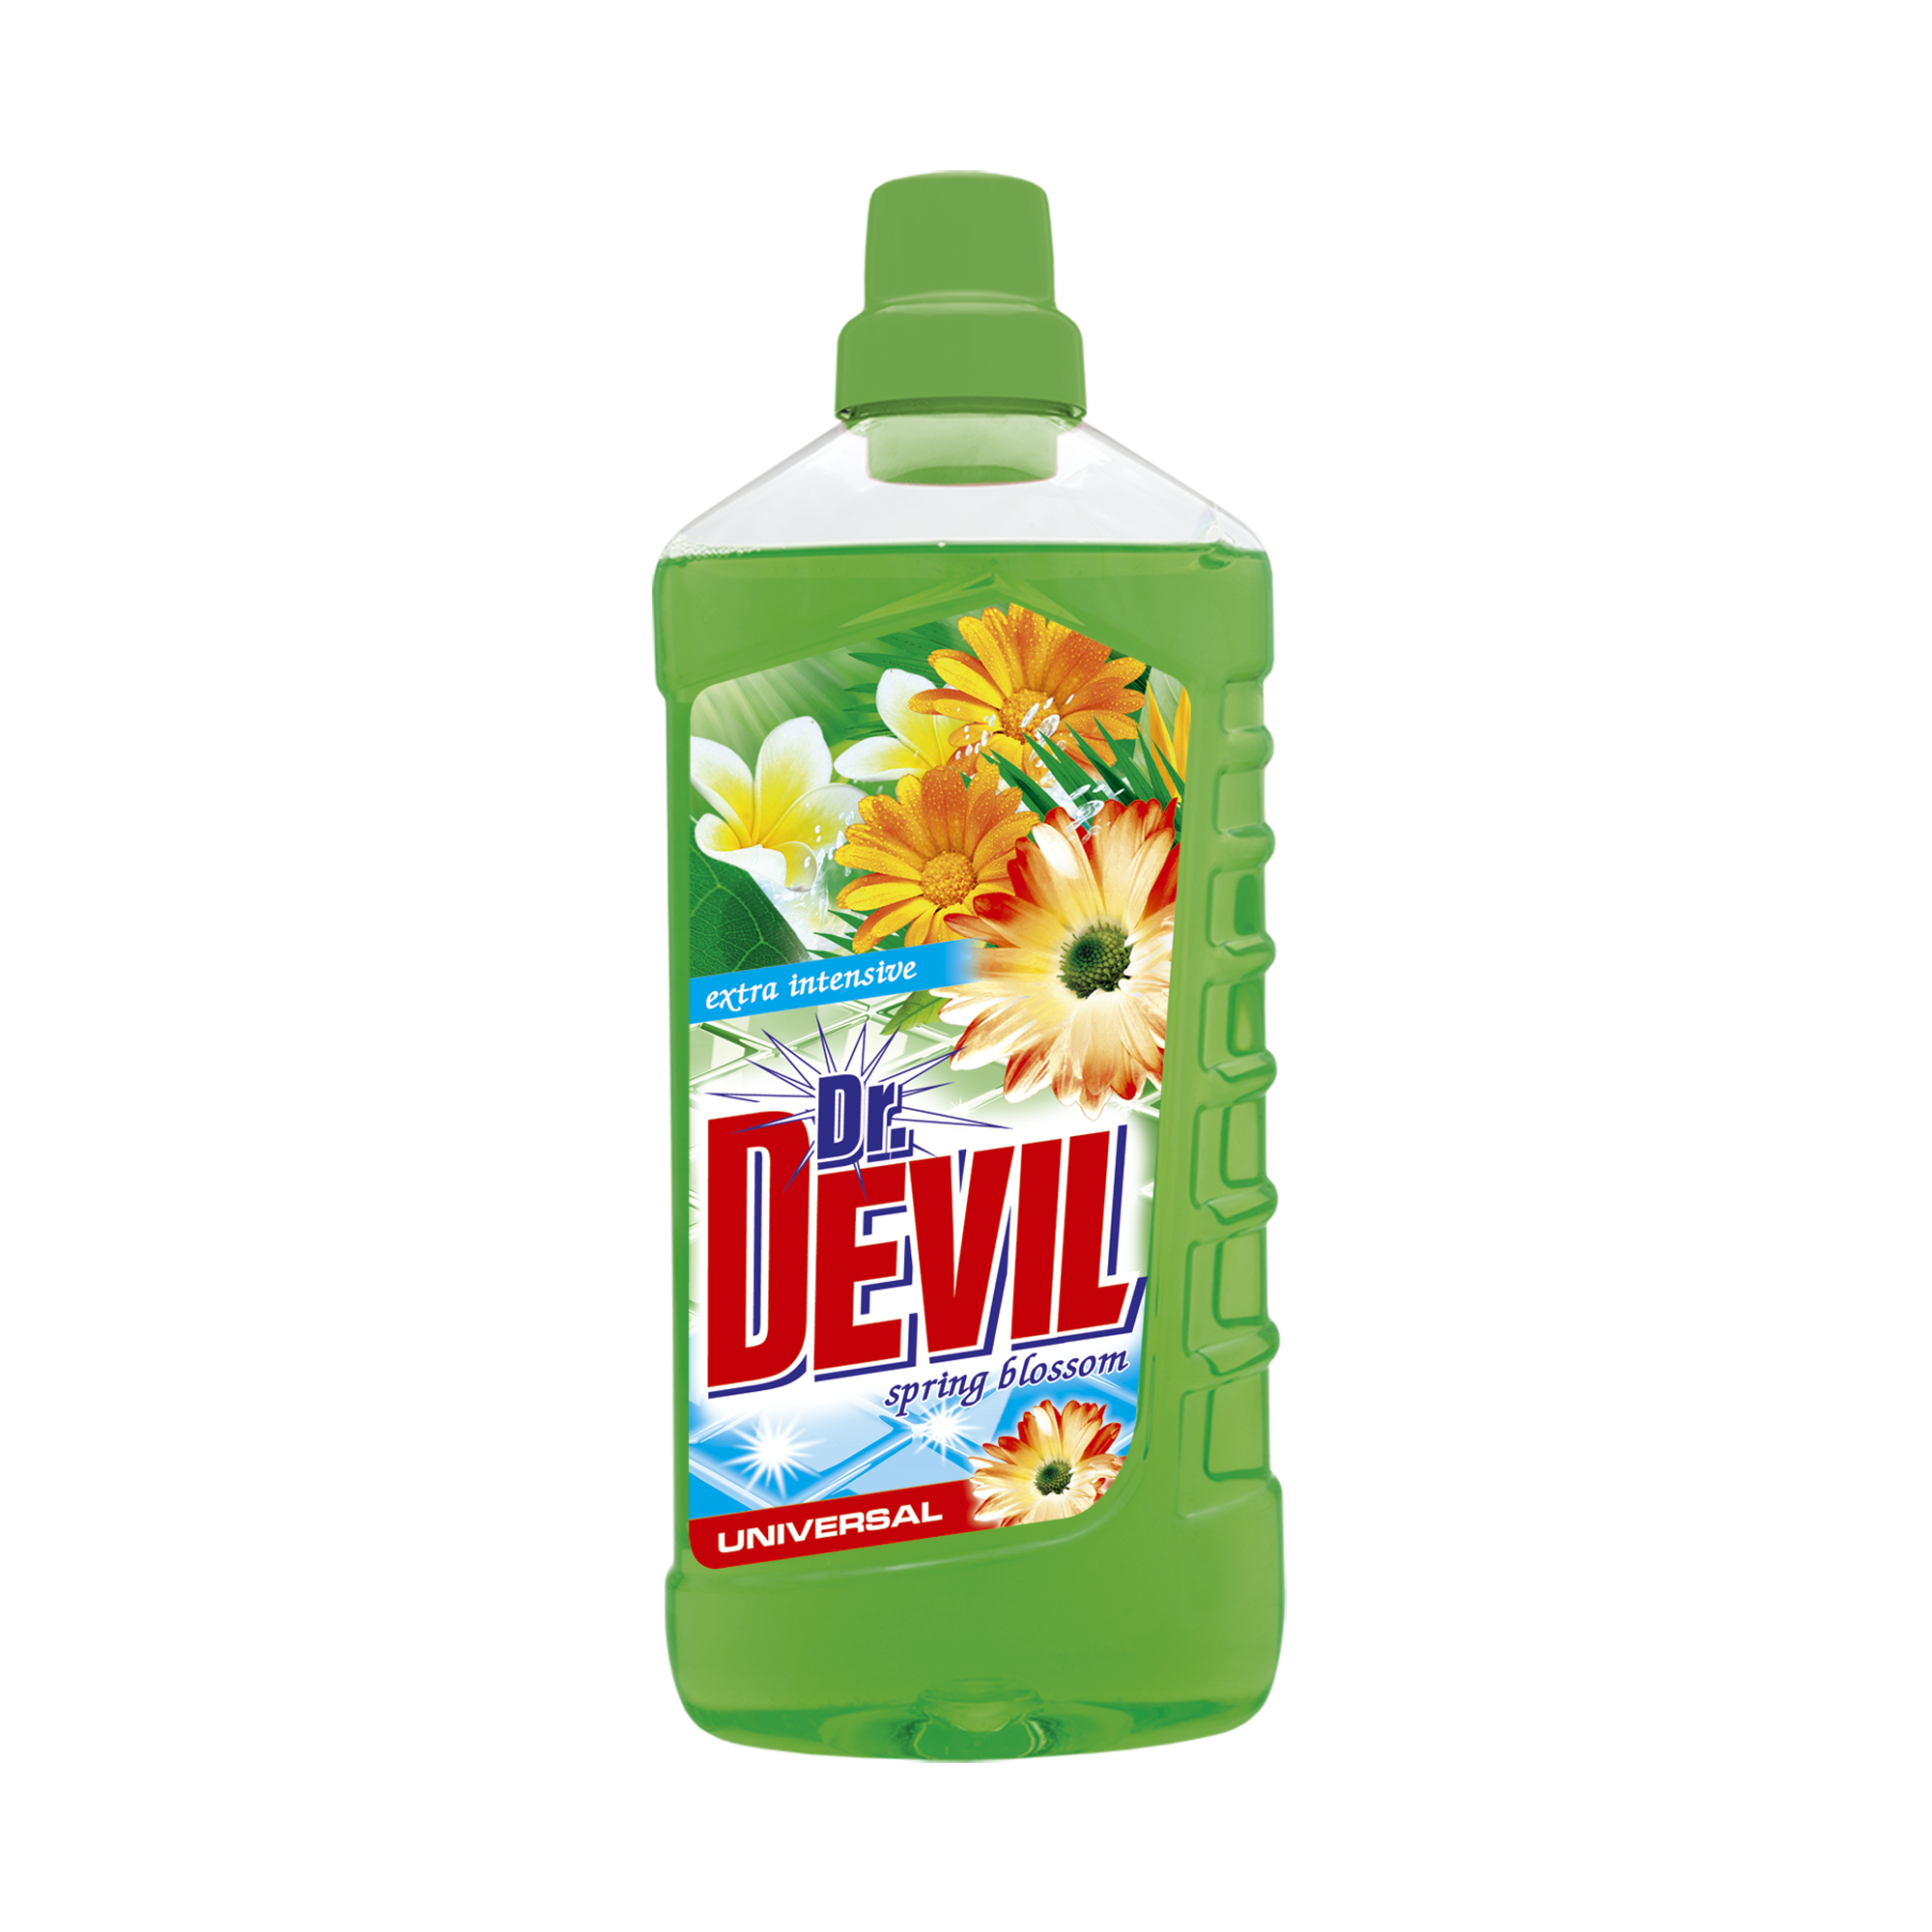 Dr. Devil universal cleaning agent Spring Blossom